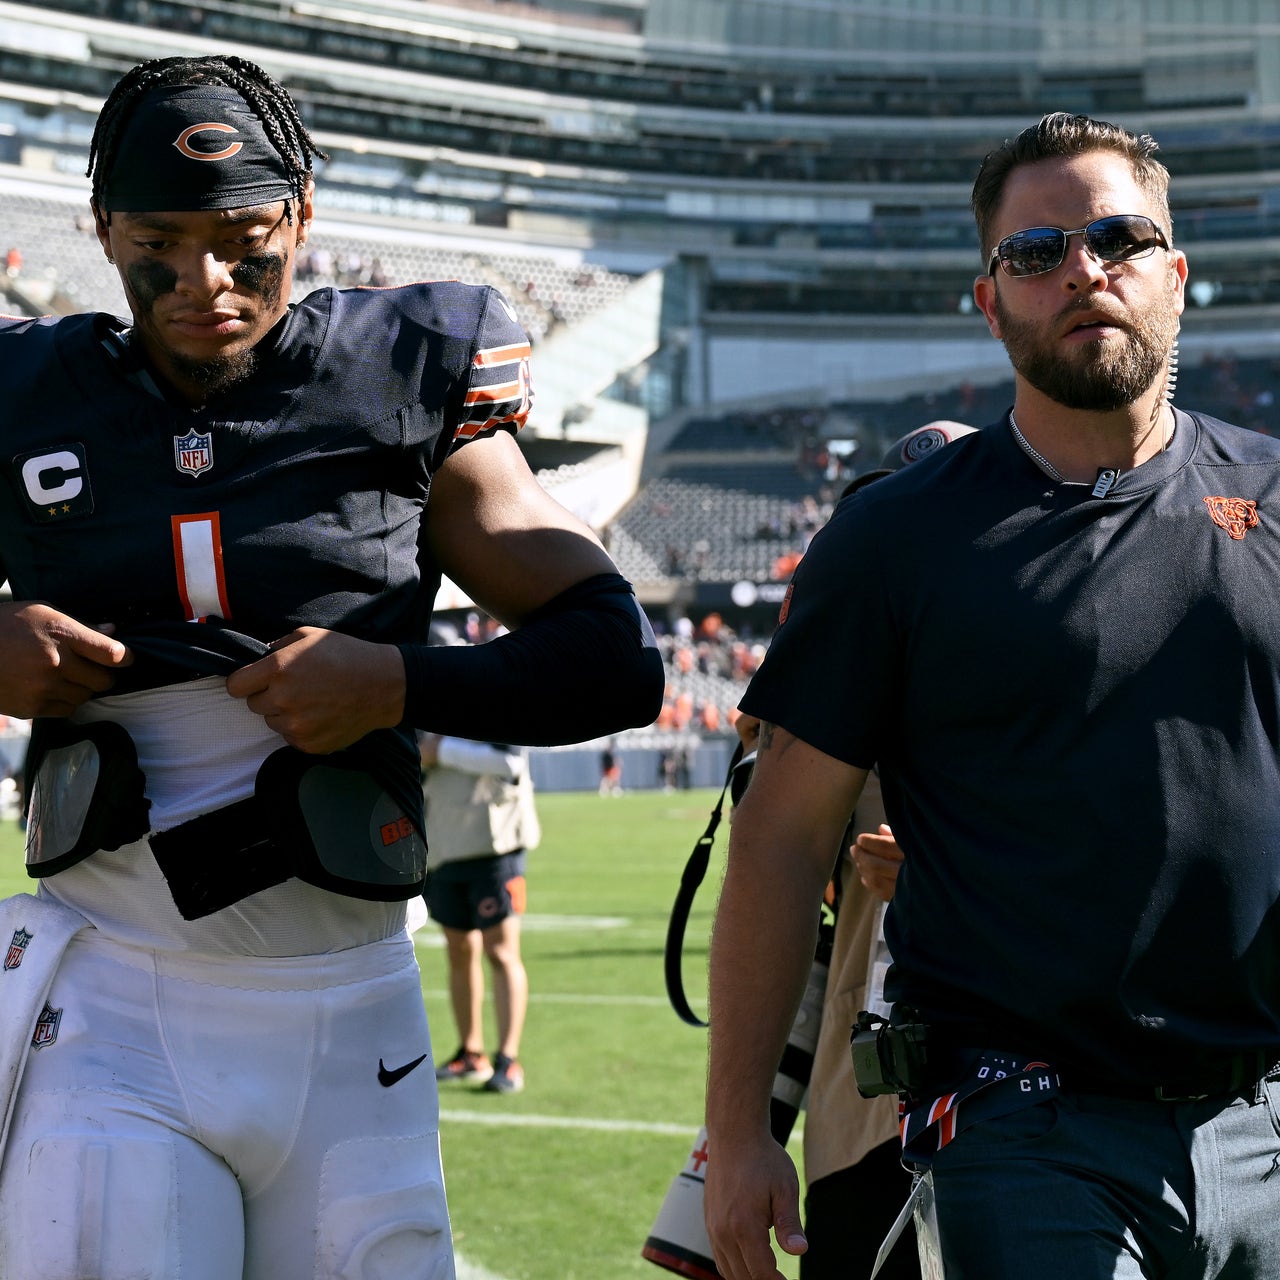 After Bears blow 21-point lead, it's fair to question if they're